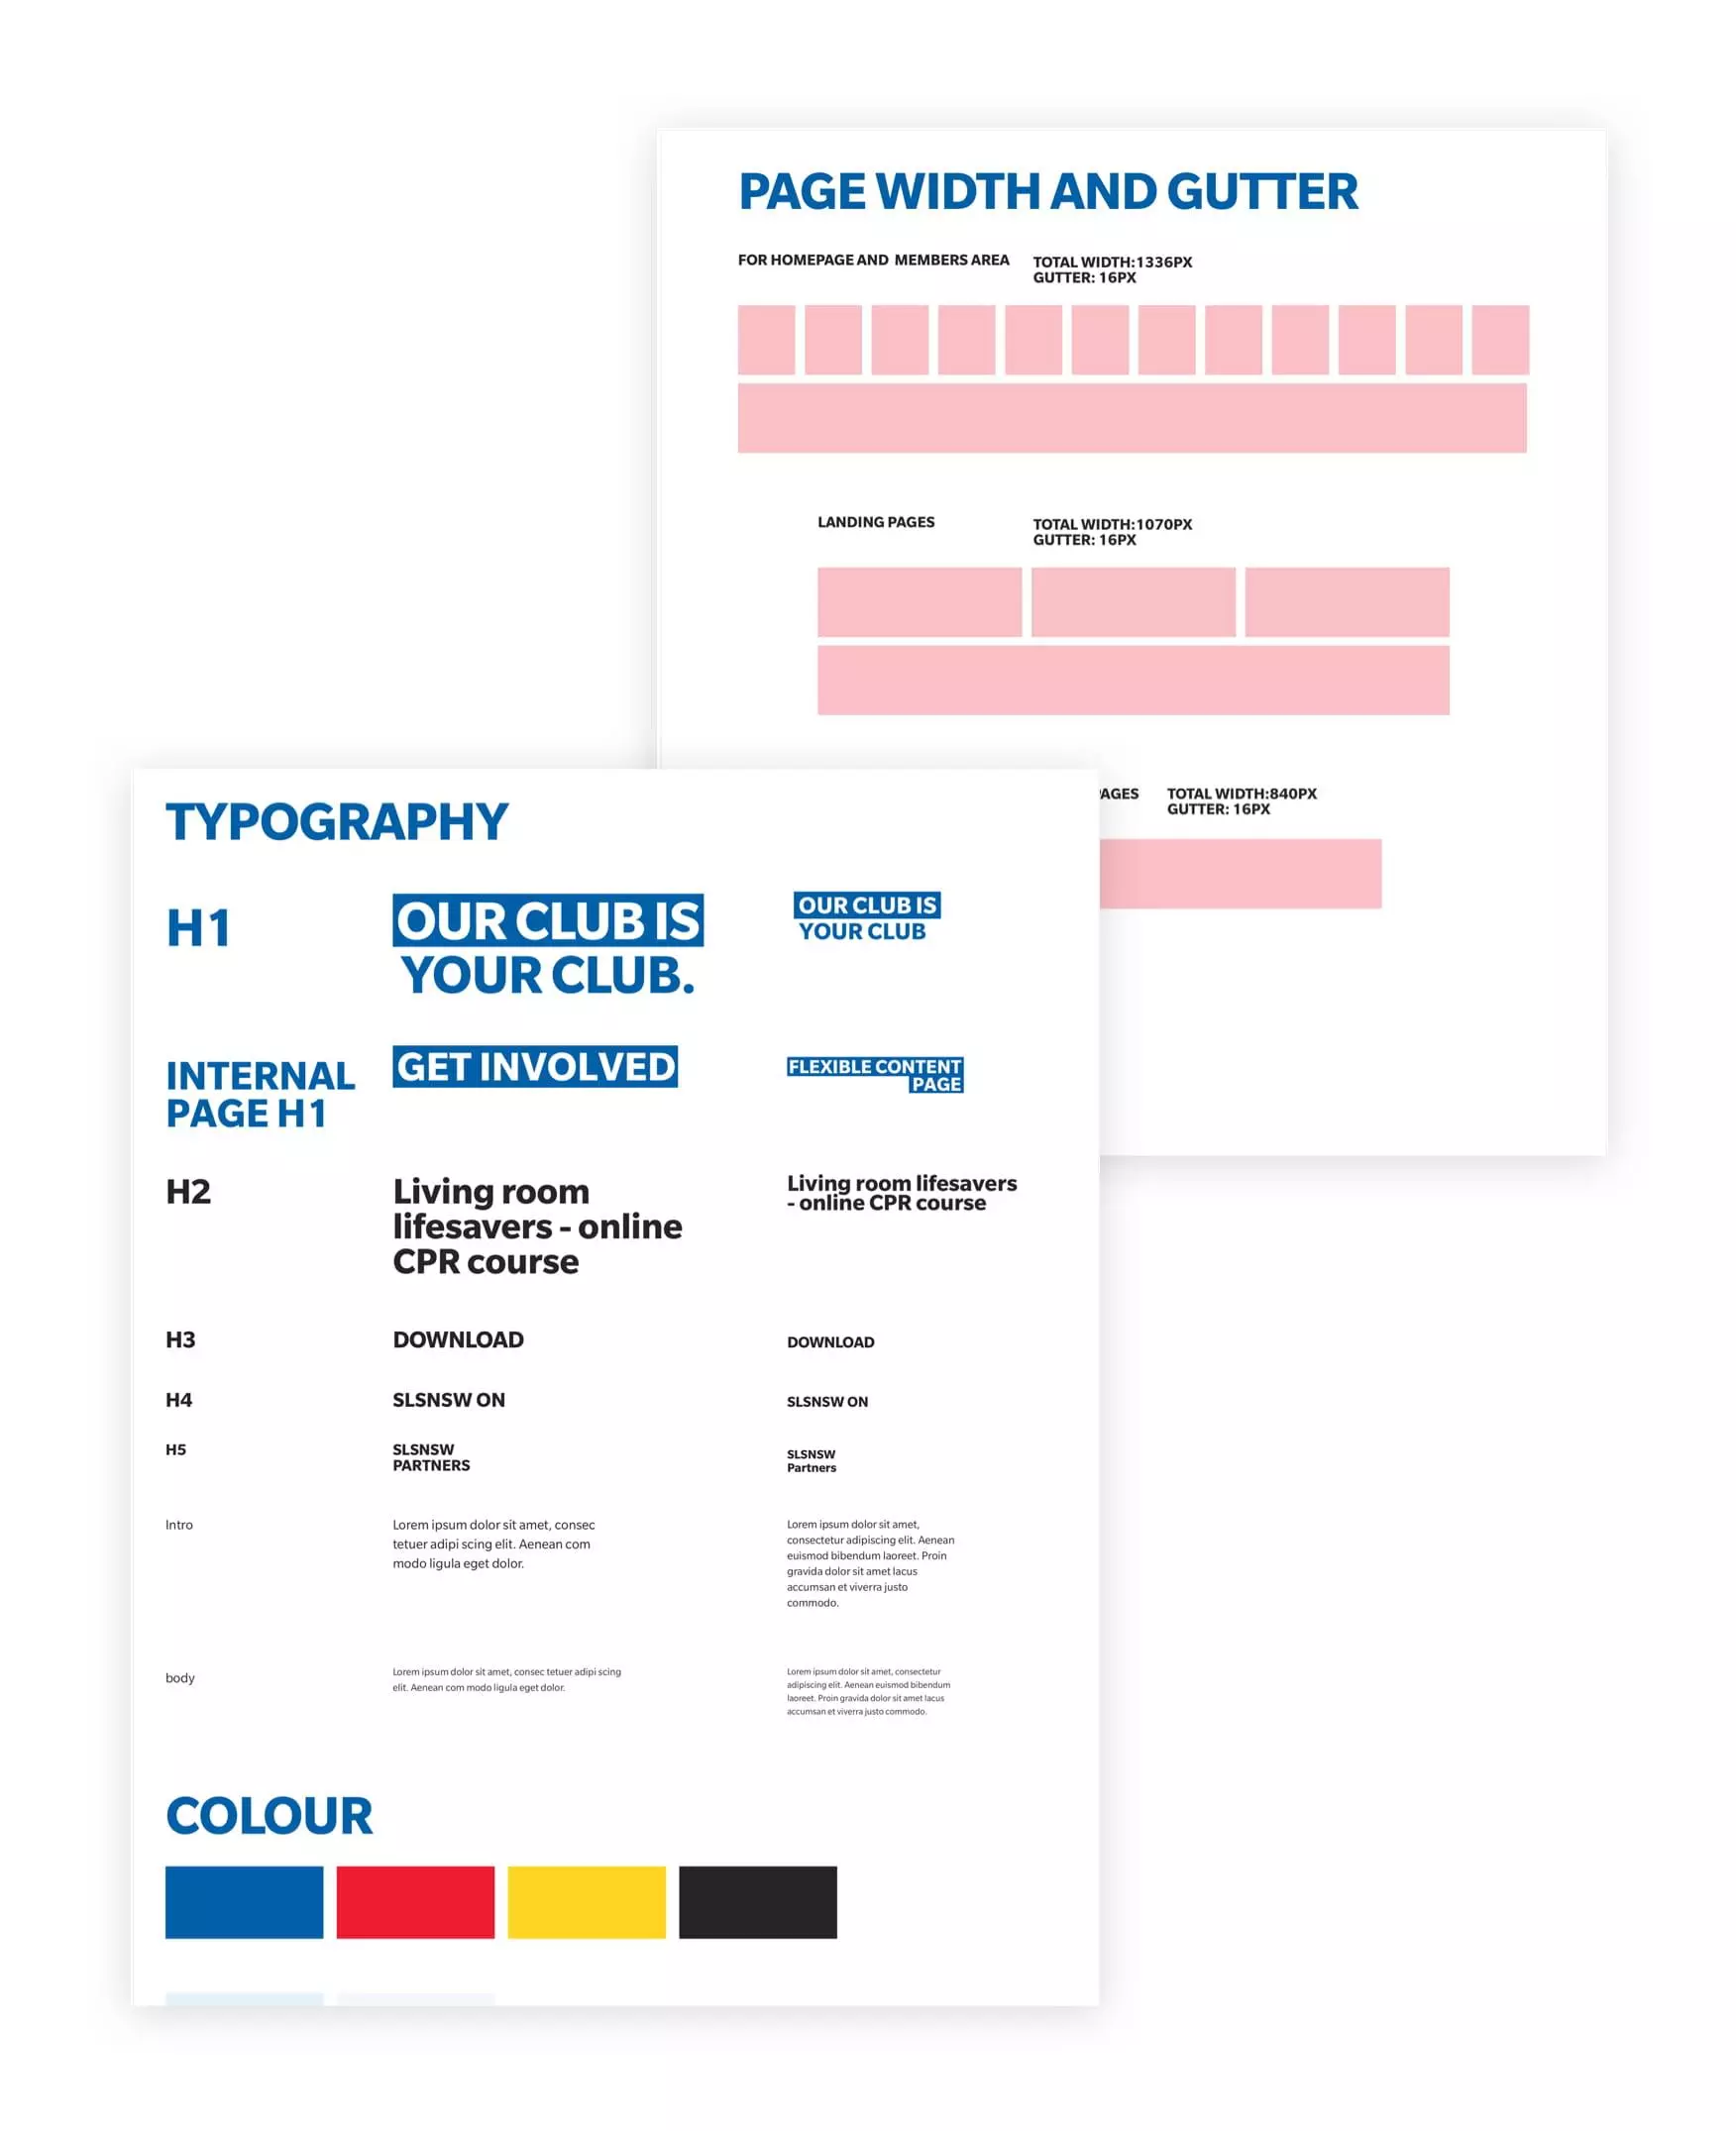 Digital style guides